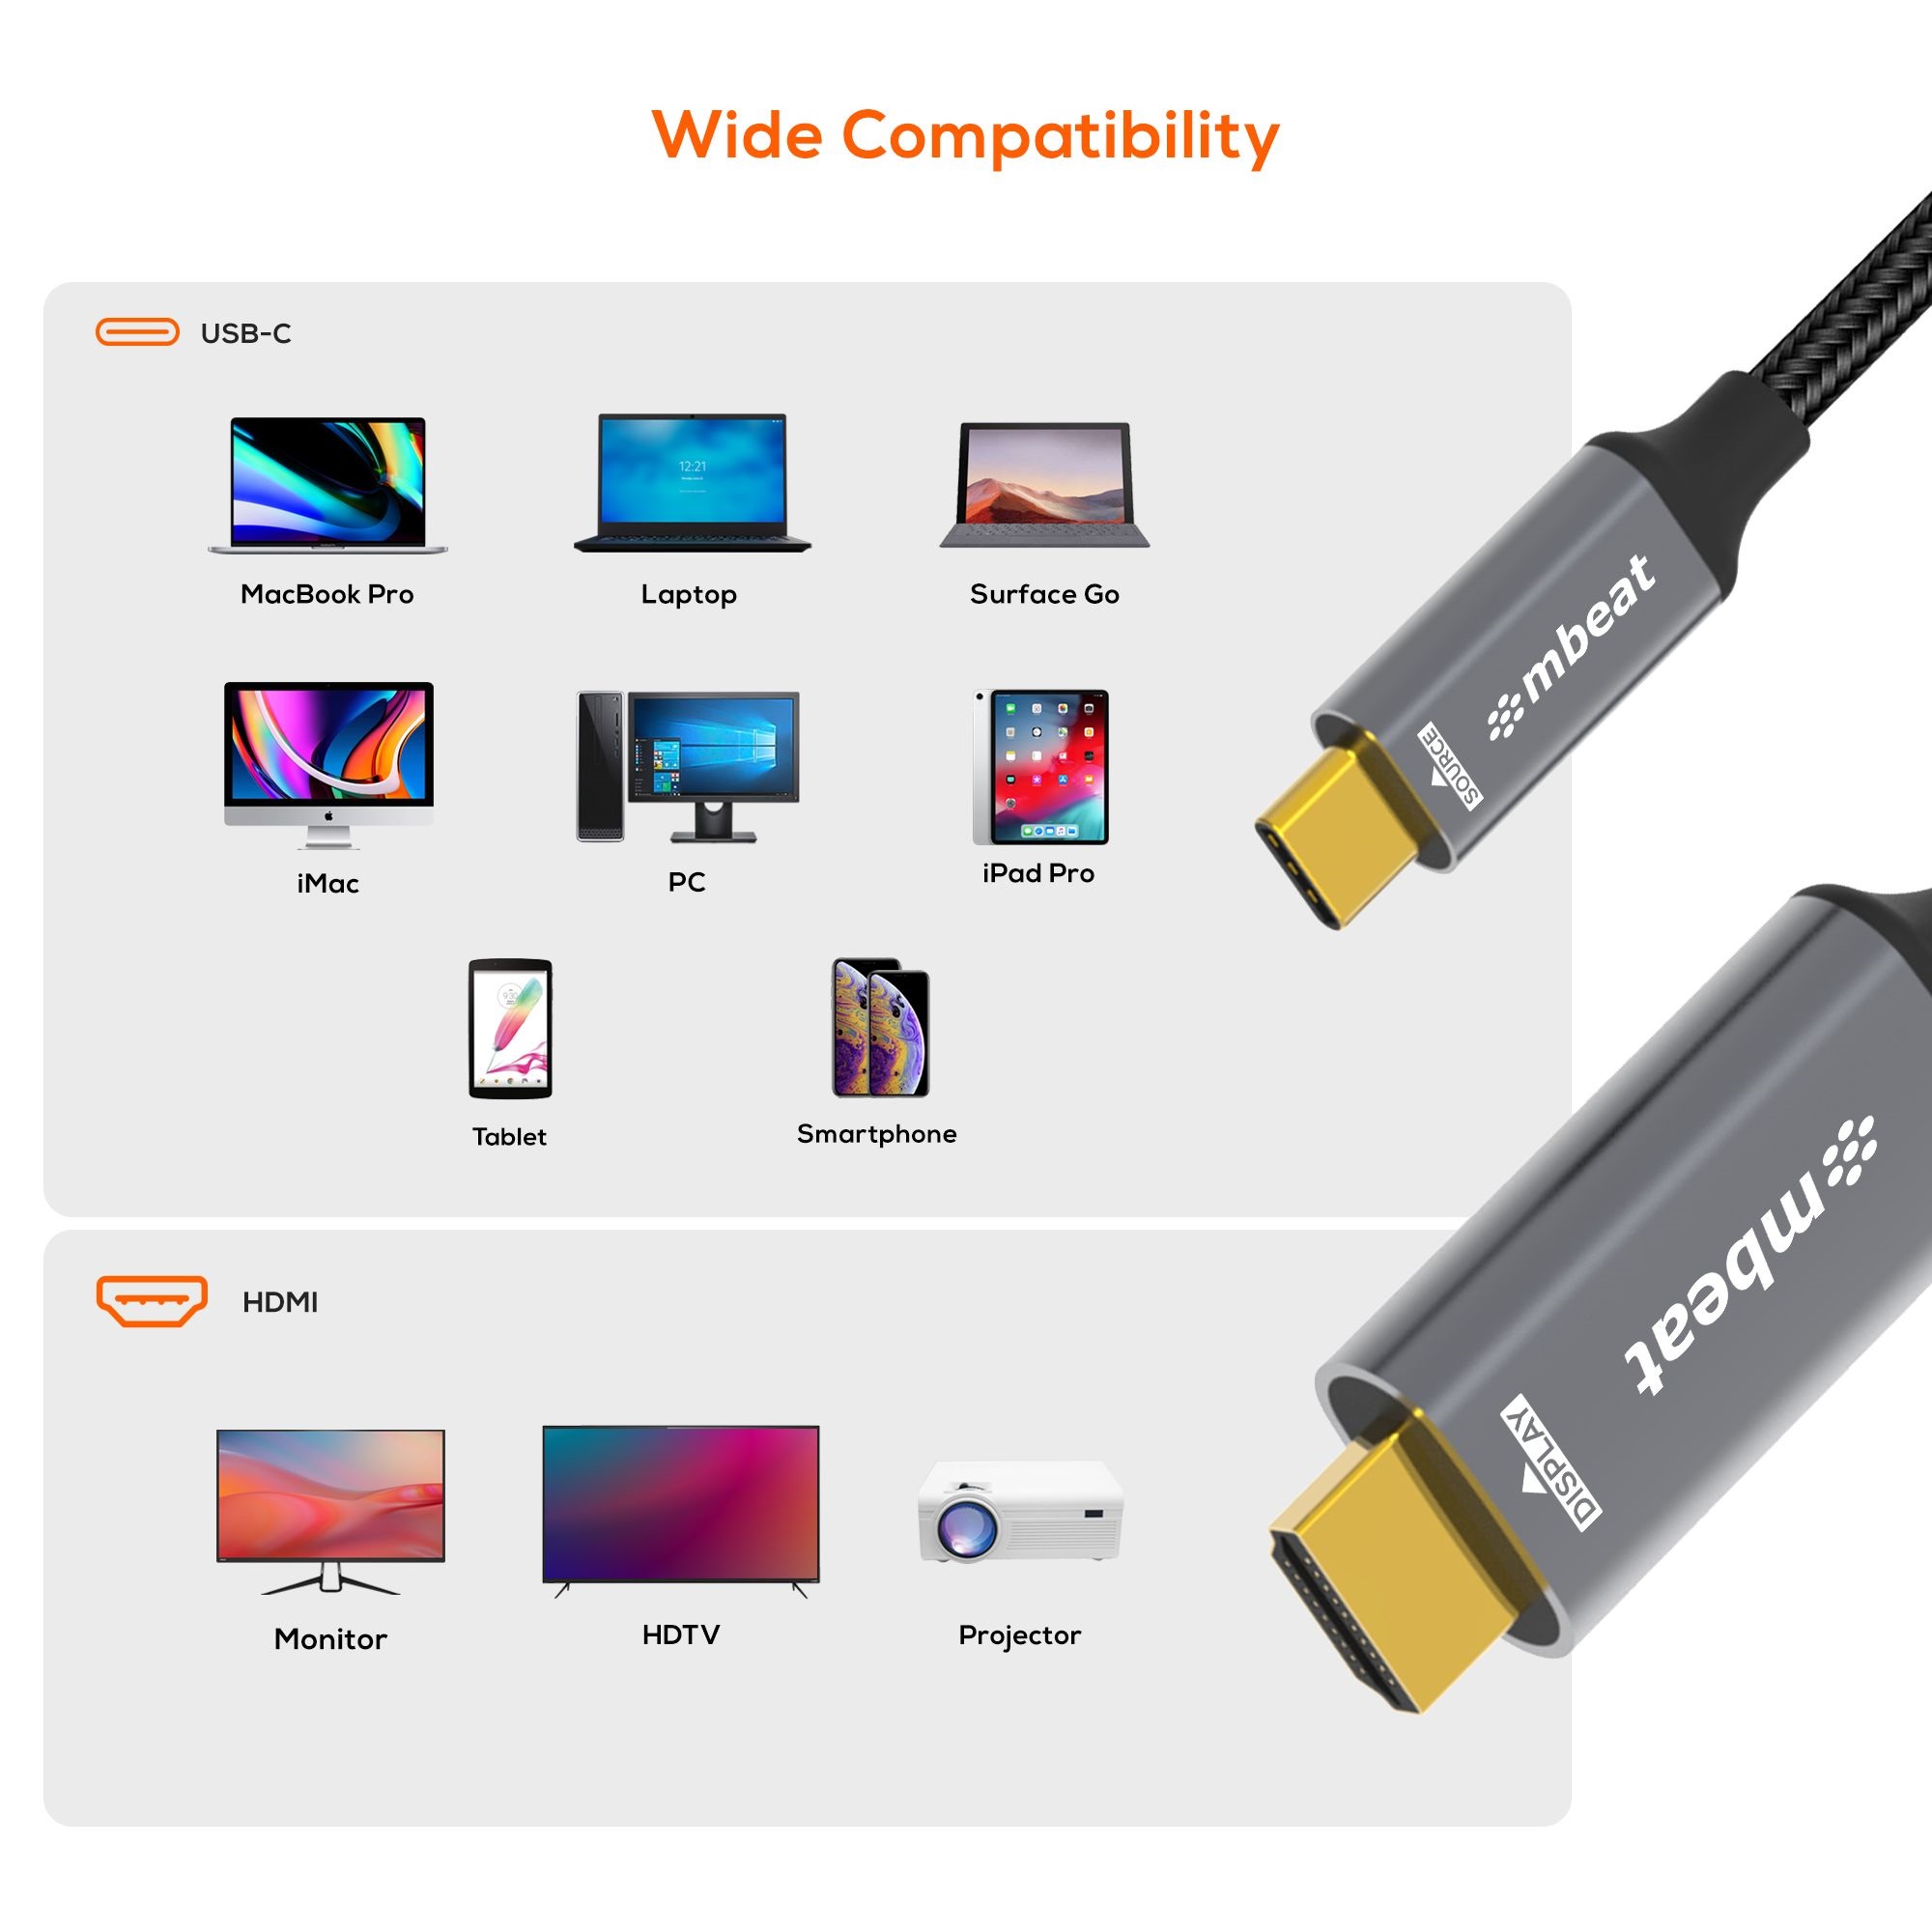 mbeat Tough Link 8K 1.8m USB-C to HDMI Cable  Host Interface: USB-C Output Interface: HDMI